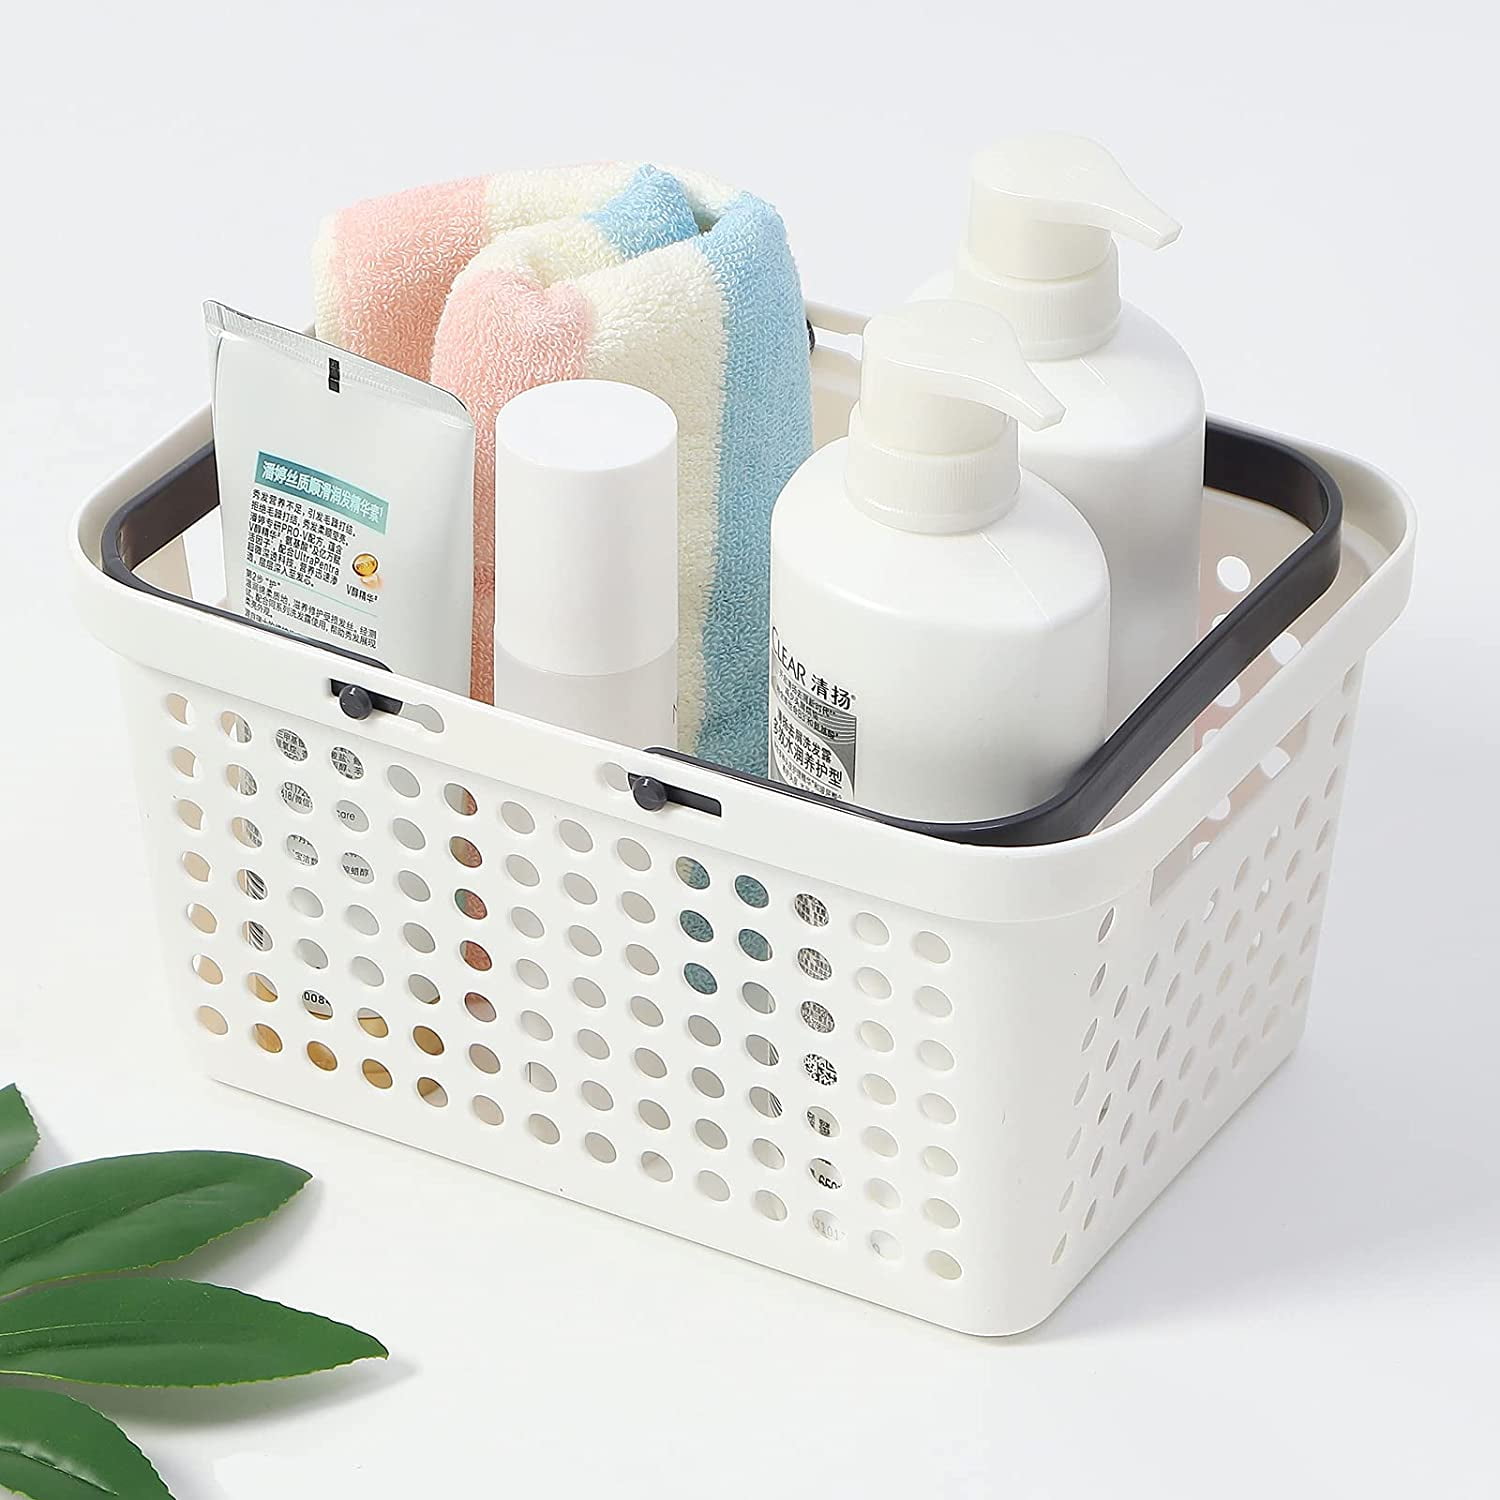 Foeses White Plastic Storage Organizer Basket with Handles, Shower Caddy Tote Portable Storage Bins for Bathroom, Dorm, Kitchen, Bedroom, Size: Small